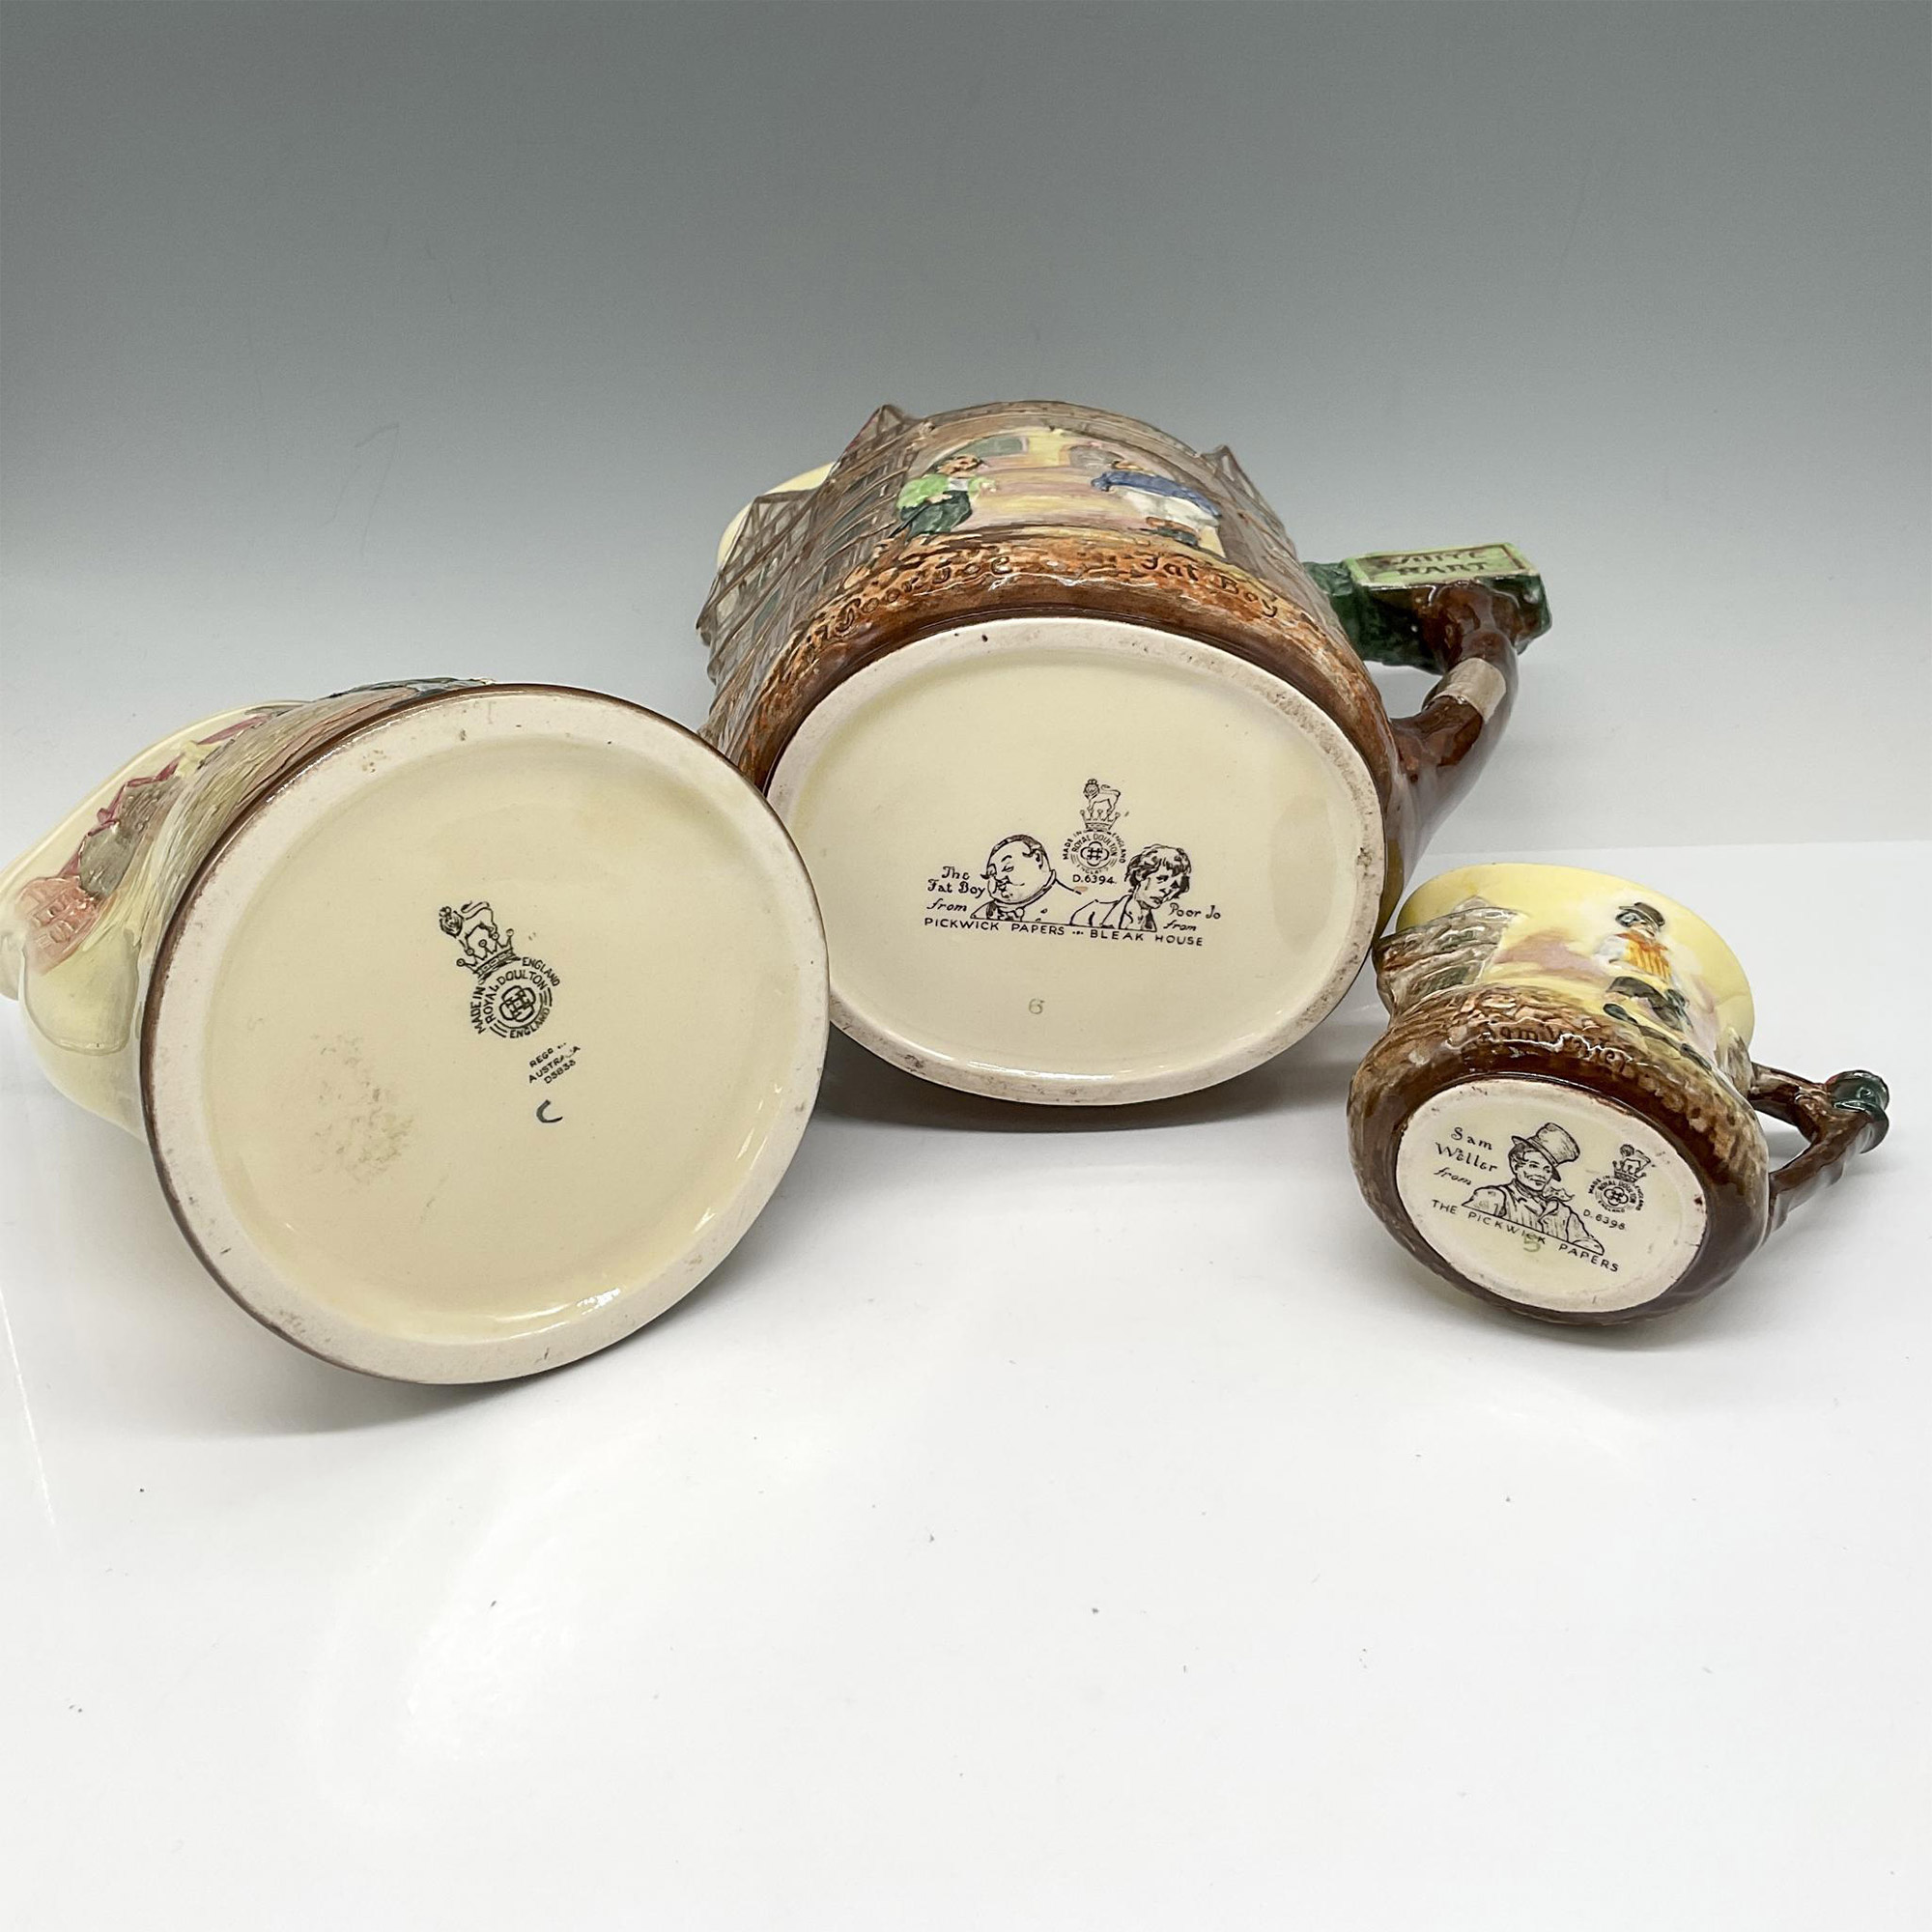 3pc Royal Doulton Dickens Ware Pitchers, The Pickwick Papers - Image 3 of 3